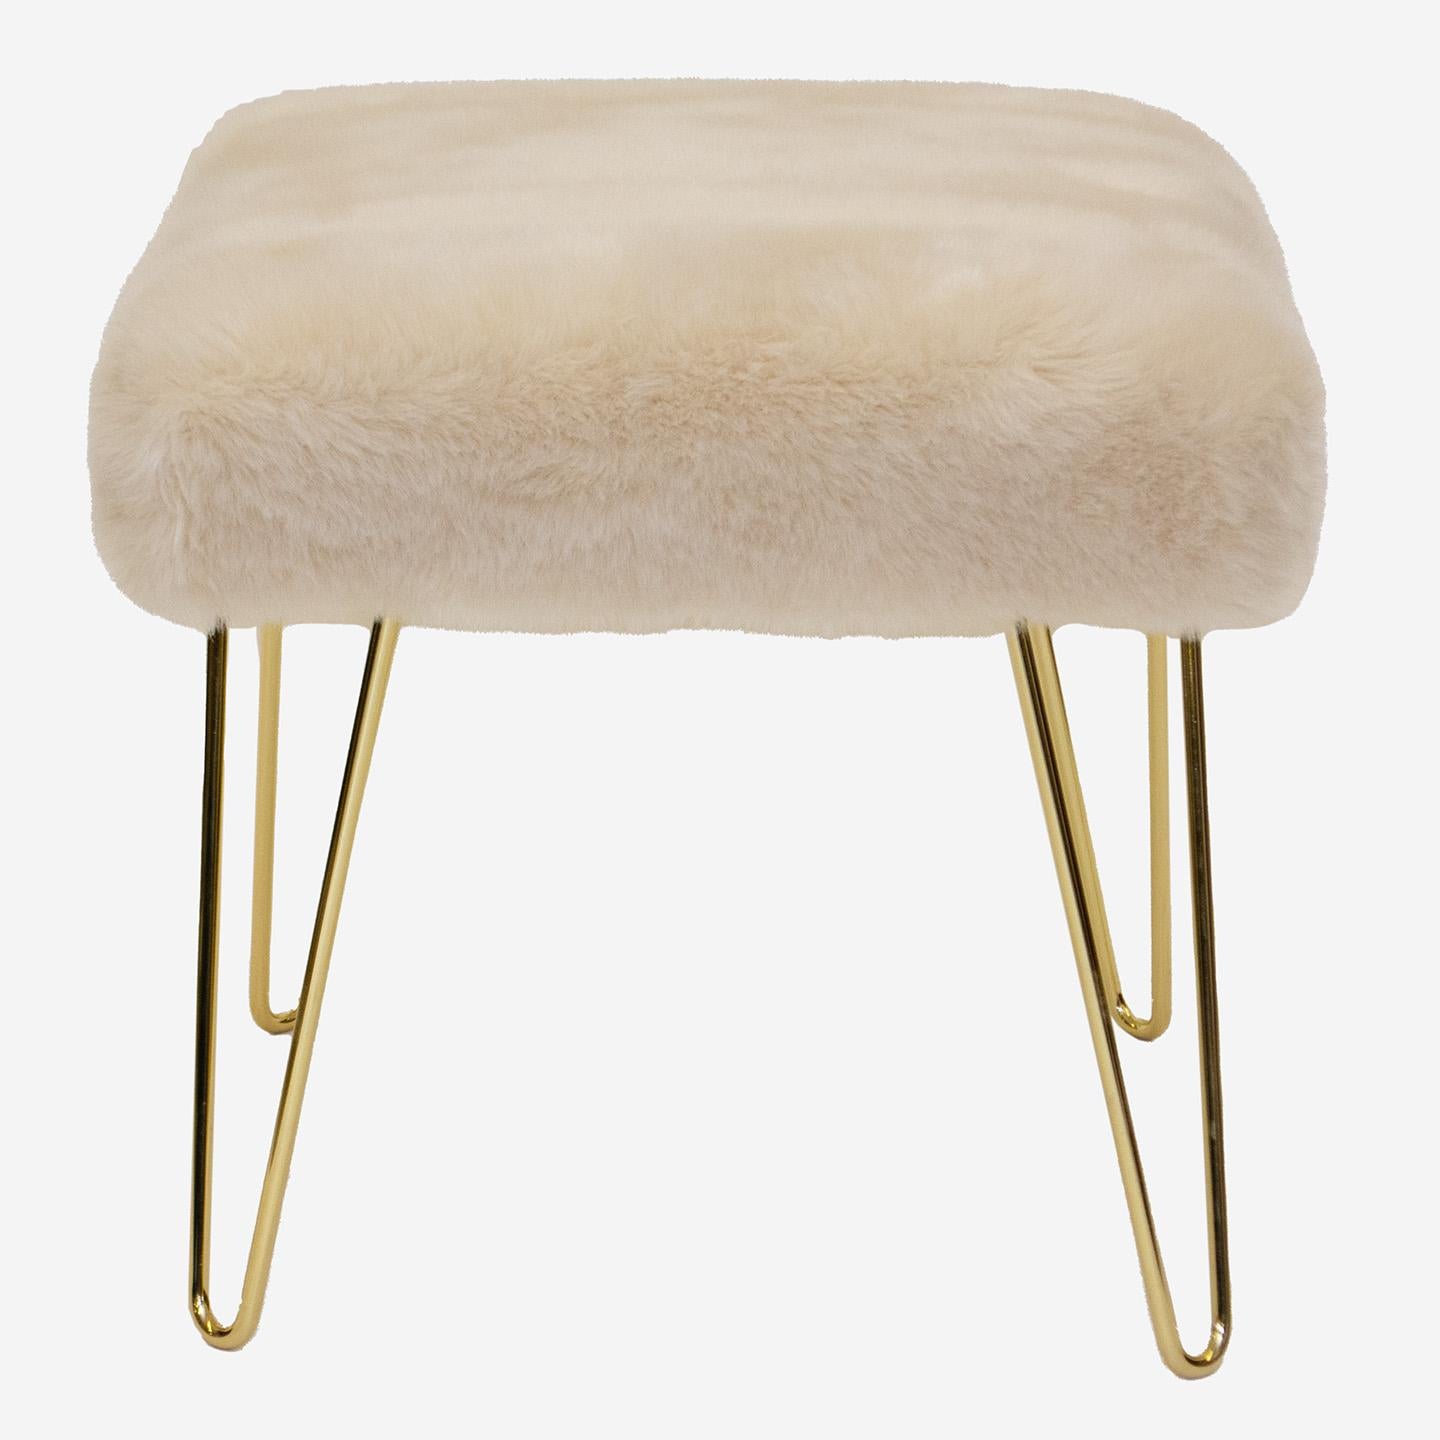 The perfect addition to any space! Wonderfully proportioned pair of ottomans upholstered in a cream colored faux fur. These work in a multitude of spaces: in a living space, under a console, at the foot of a bed. Think of anywhere you need an accent